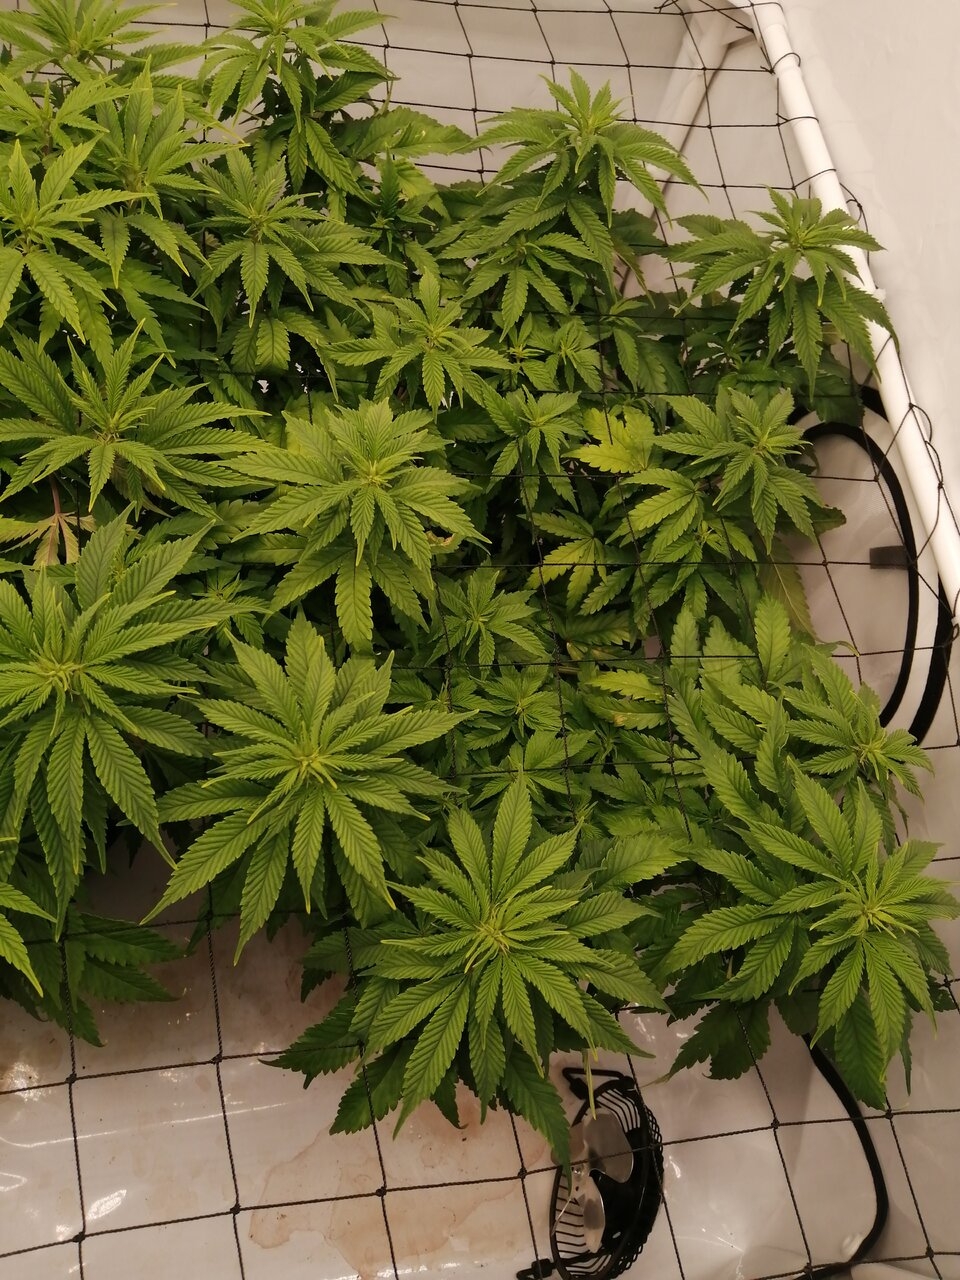 Cheese Scrog Day 3 Of Flower